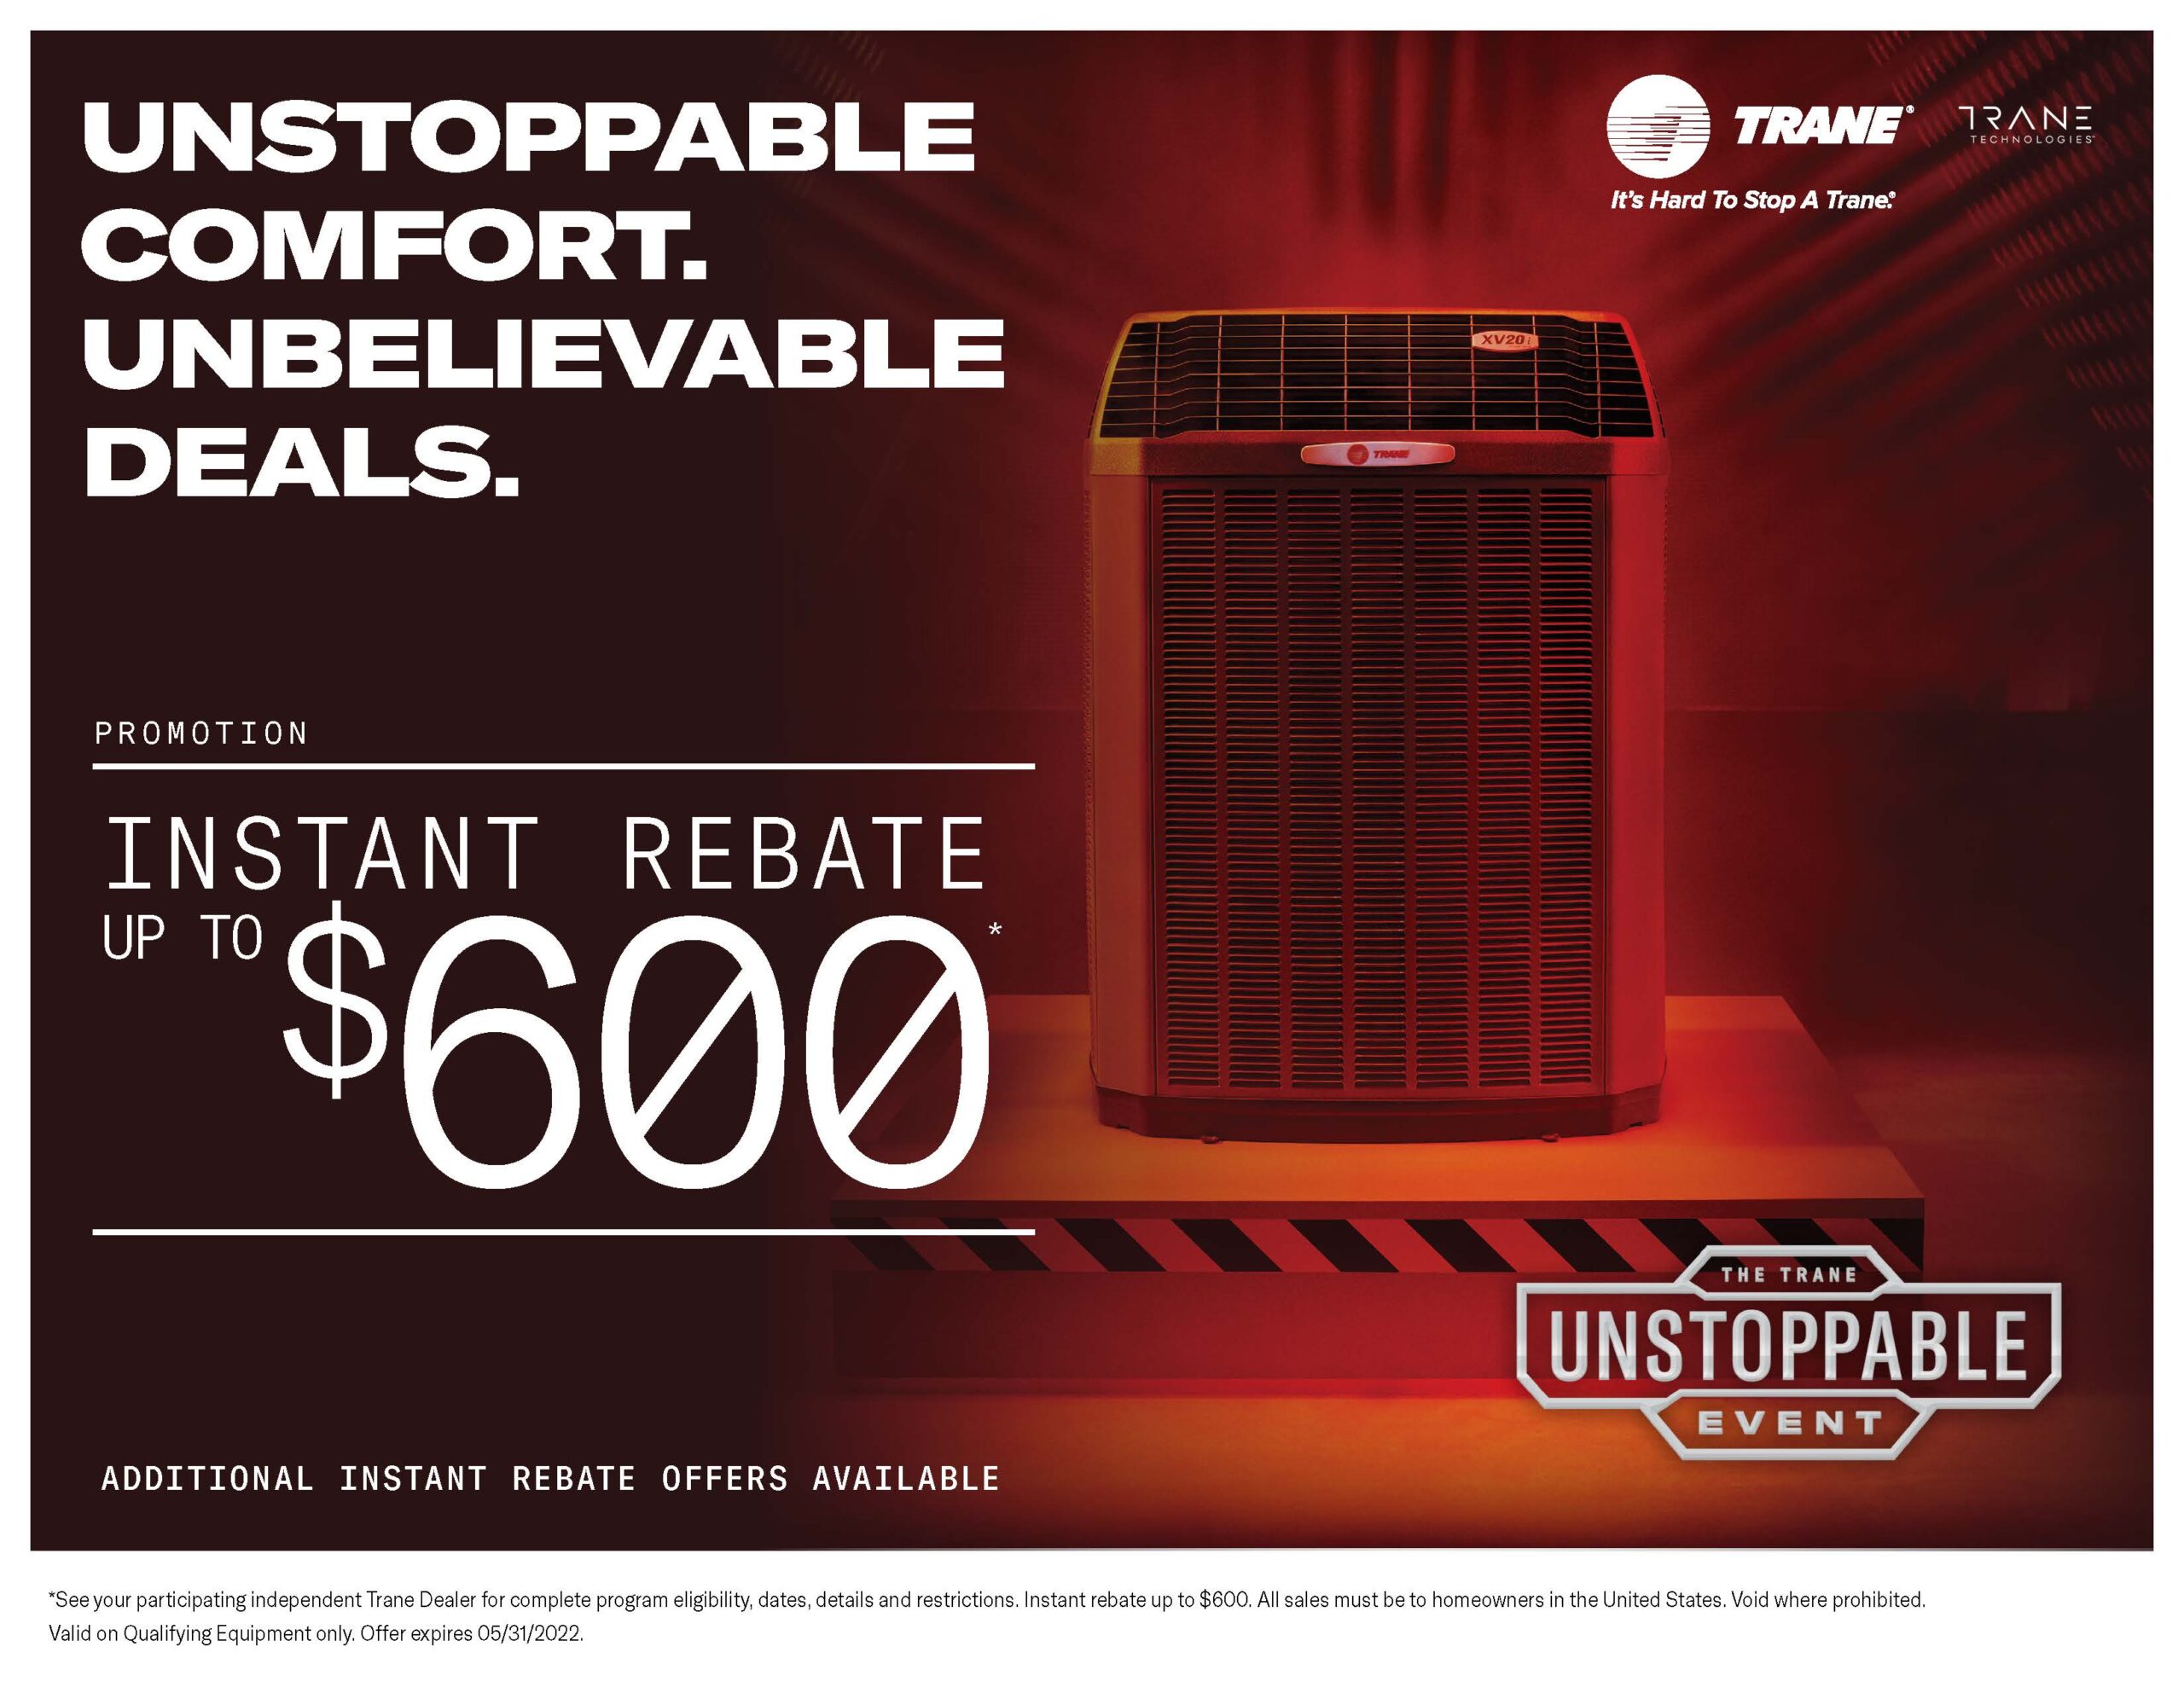 Trane Unstoppable Event Spring 2022 Rebates Deal s Heating Air